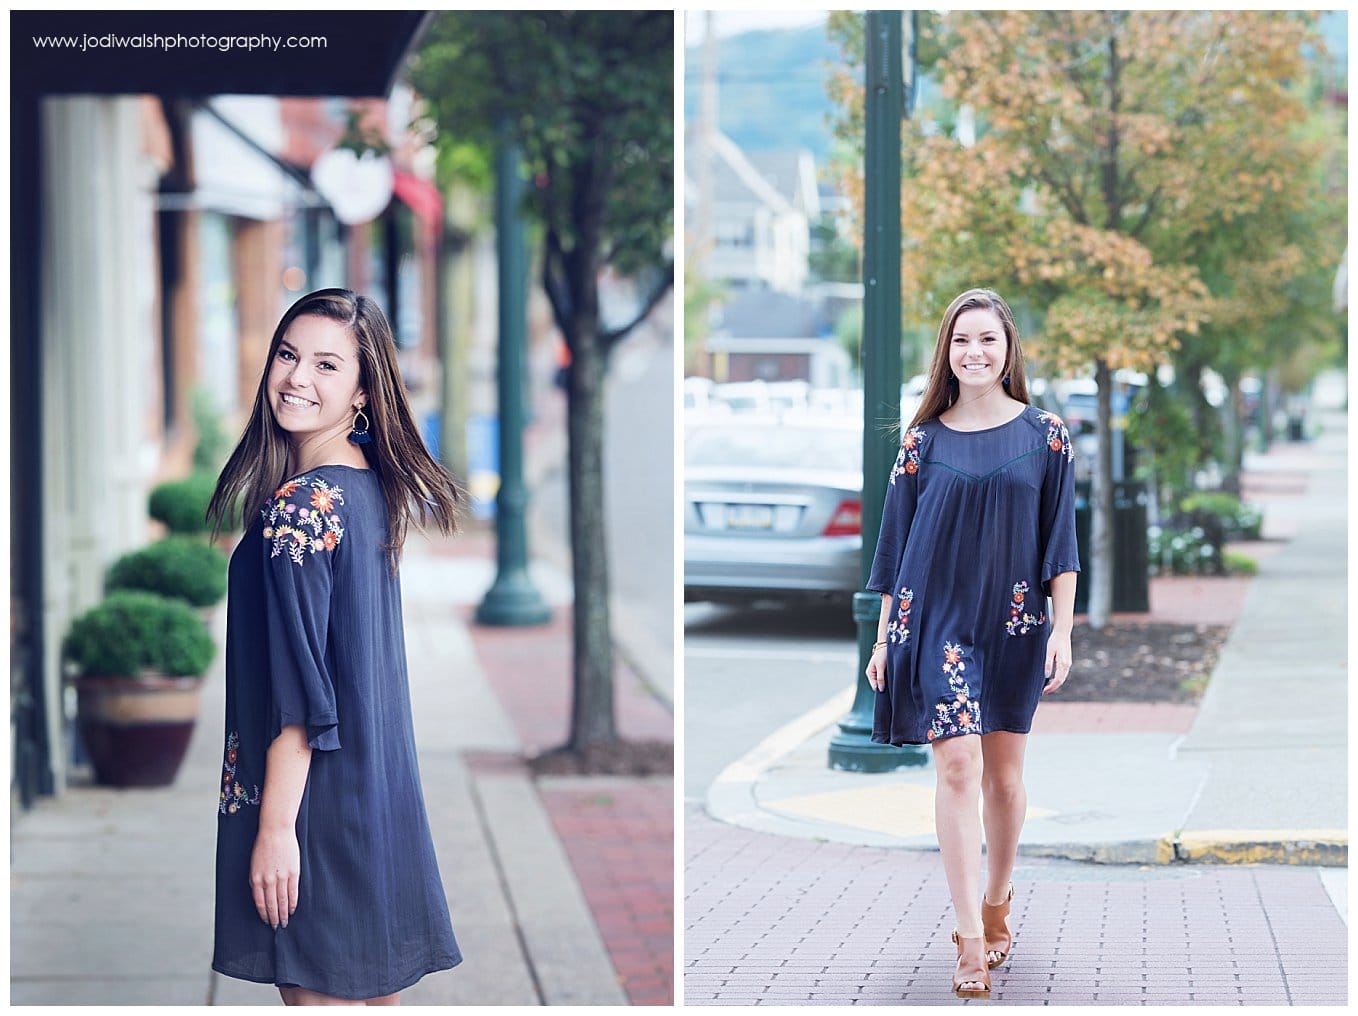 images of a senior girl posing for portraits in Sewickley.  She's walking and smiling and wearing a gray flowered dress.